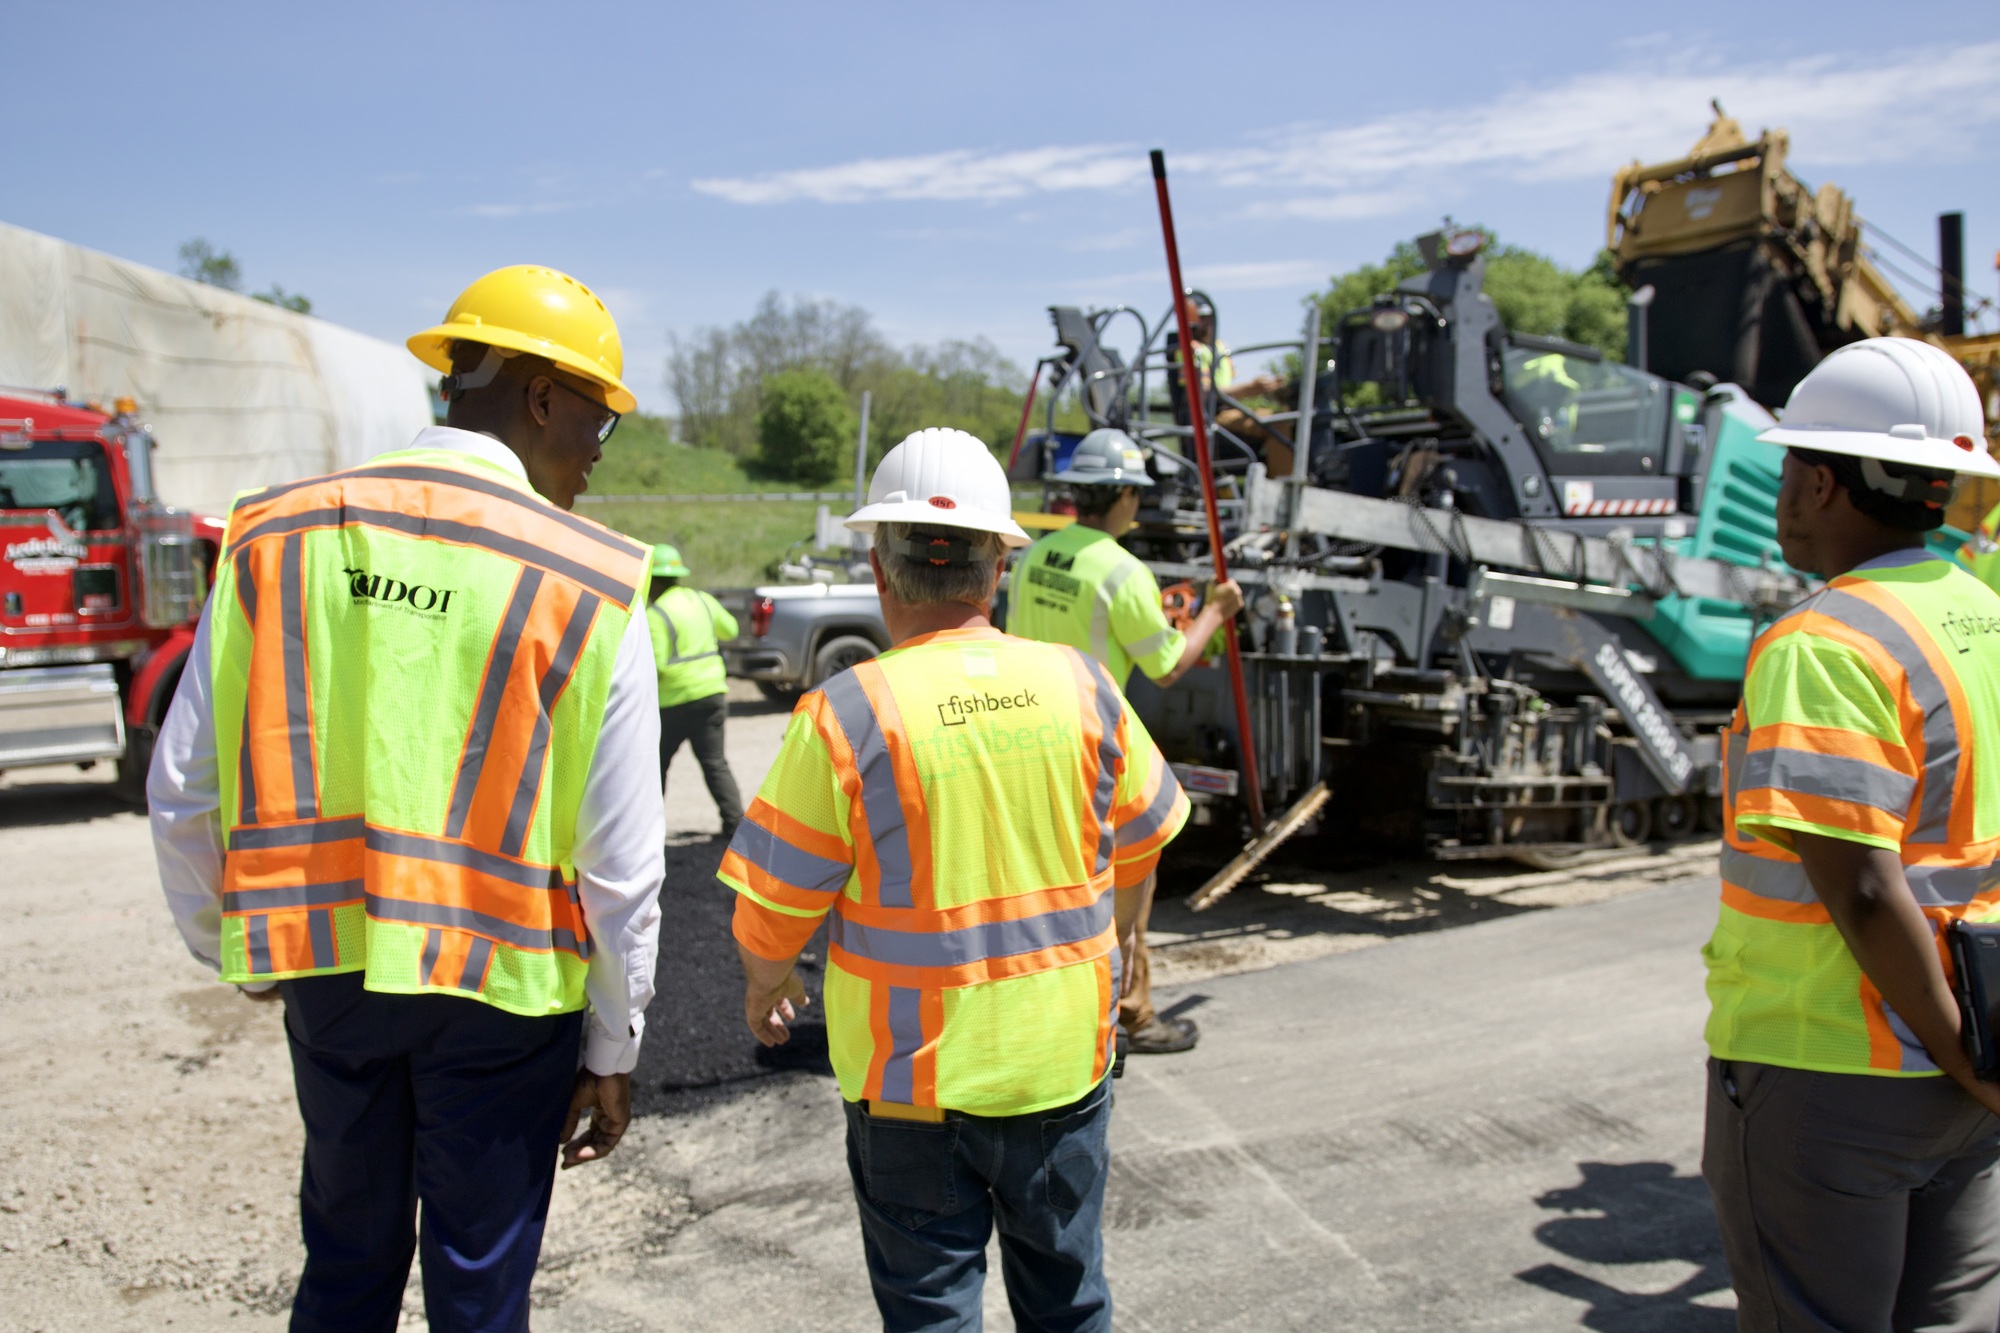 Lt. Gov talks with the road crew during a visit to see road repairs 